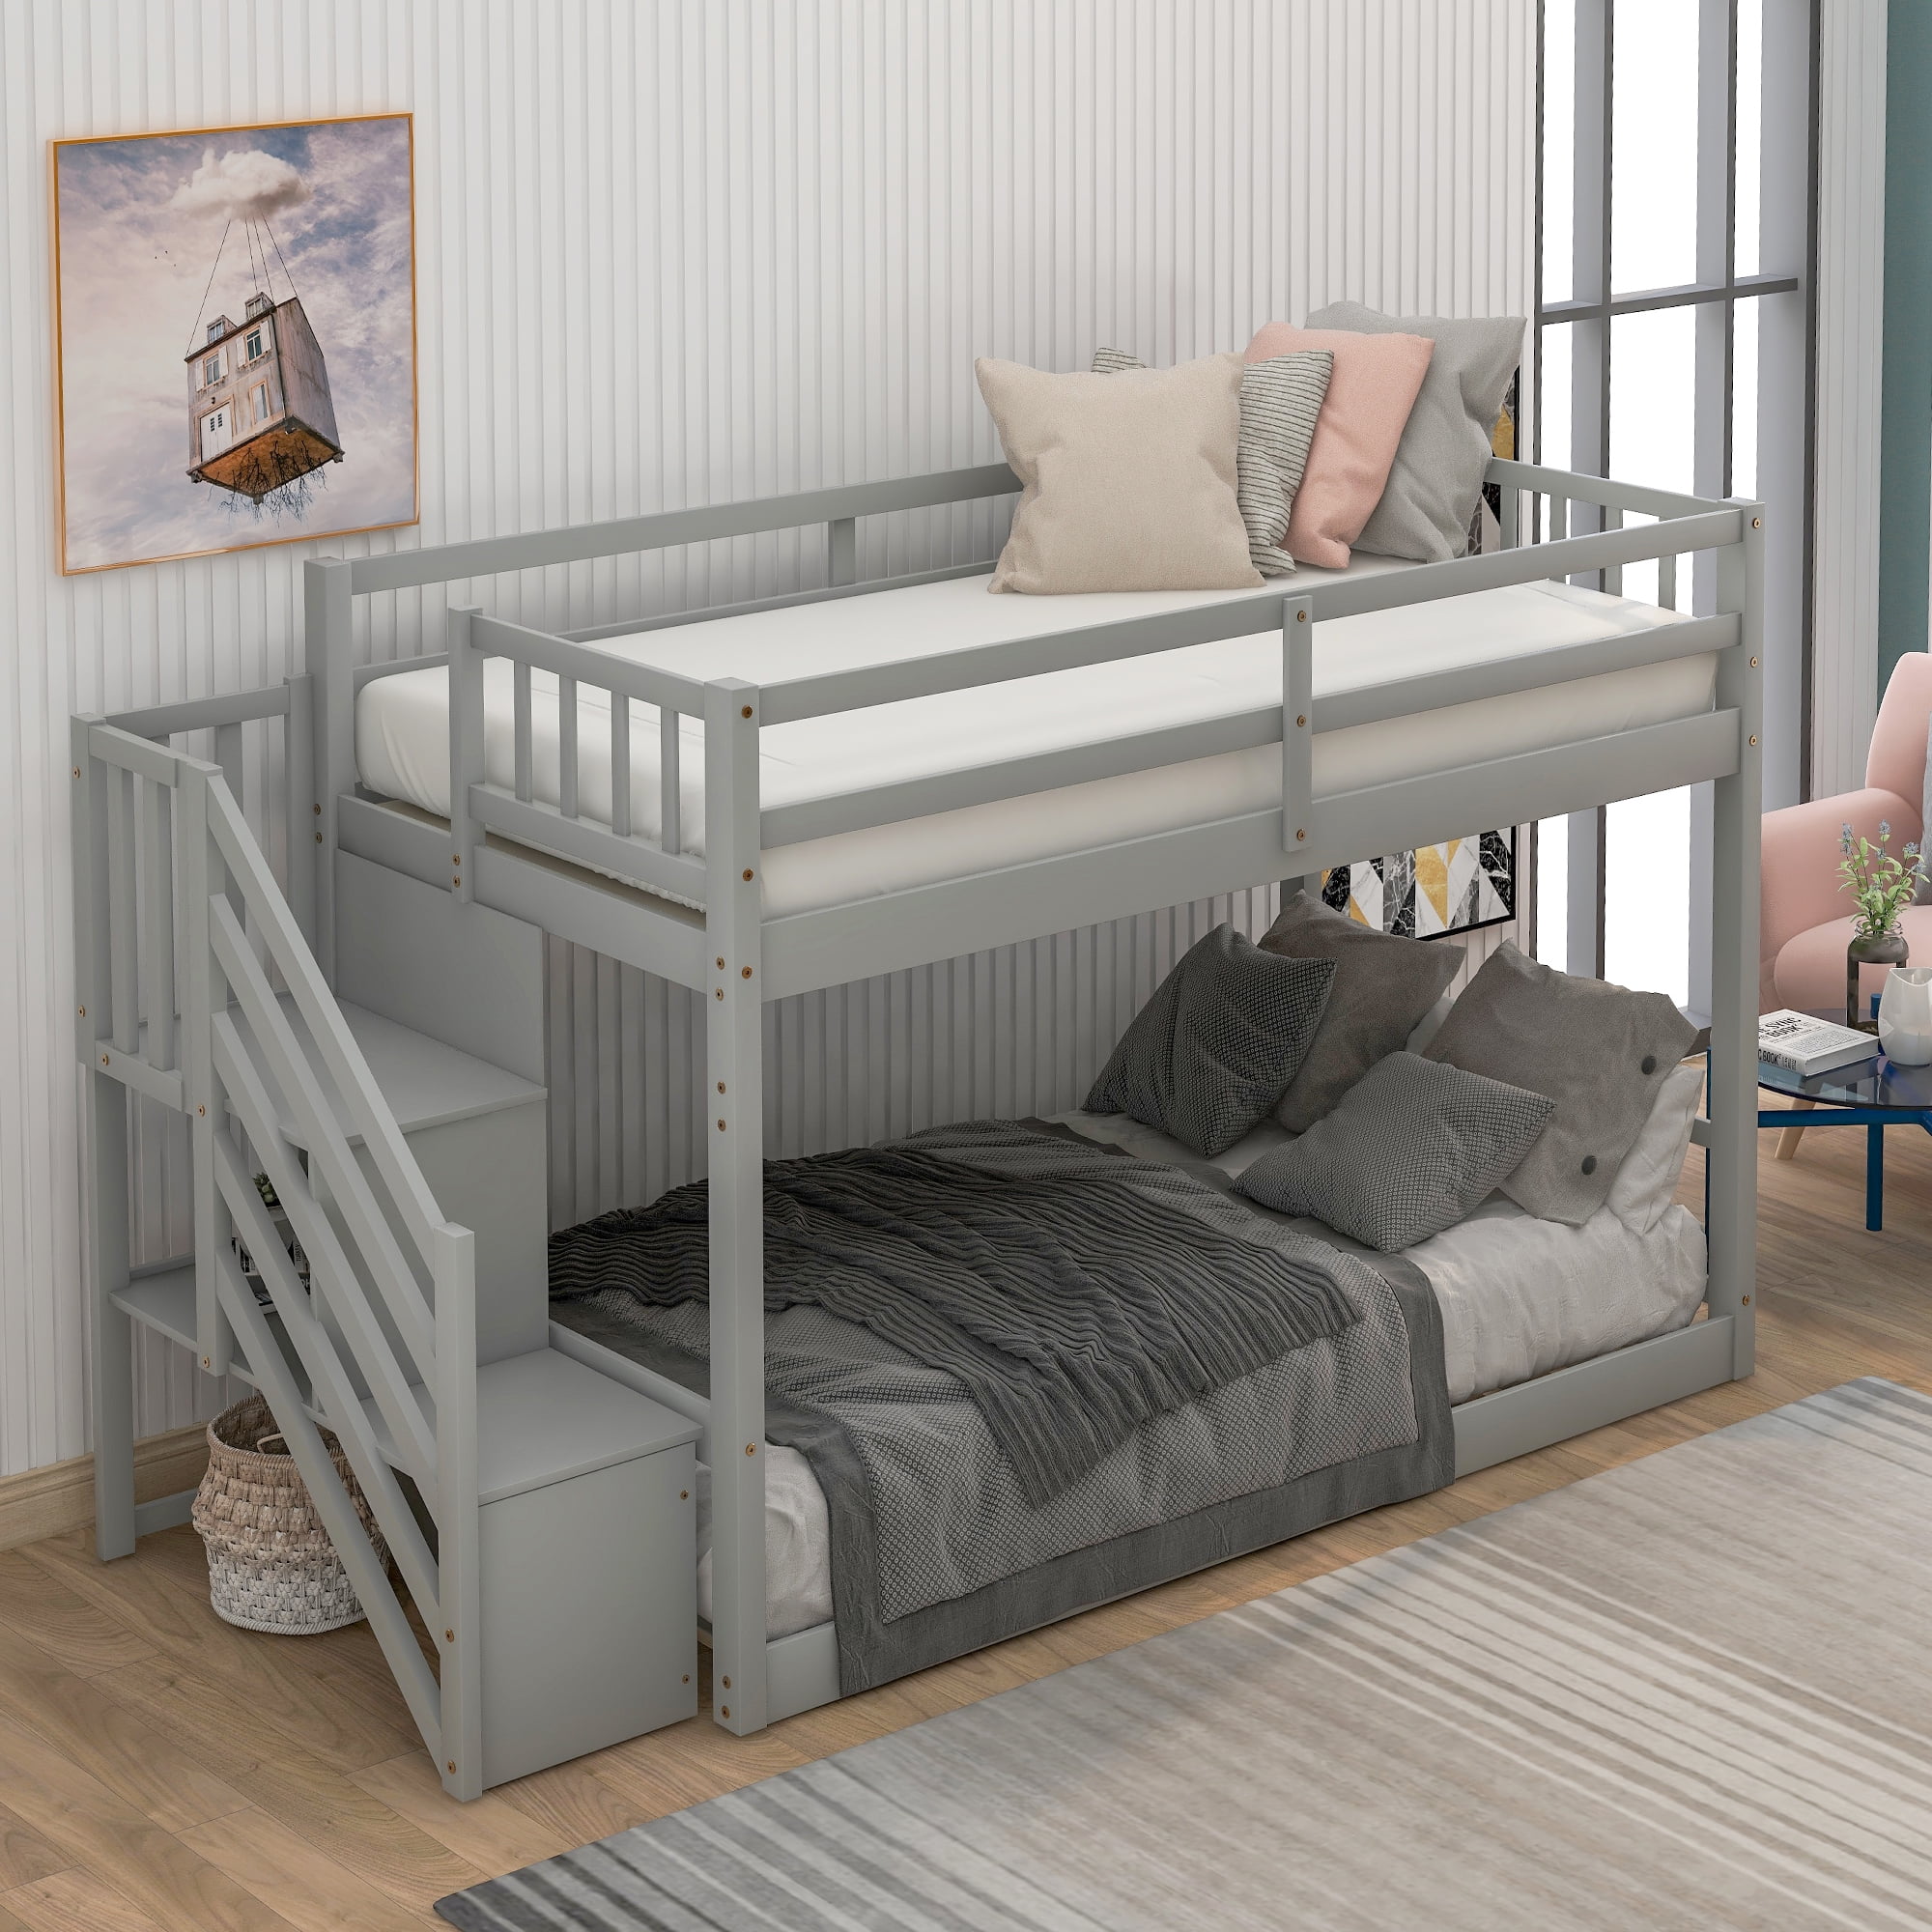 Euroco Wood Twin Over Floor Bunk, Woodcrest Bunk Beds With Stairs